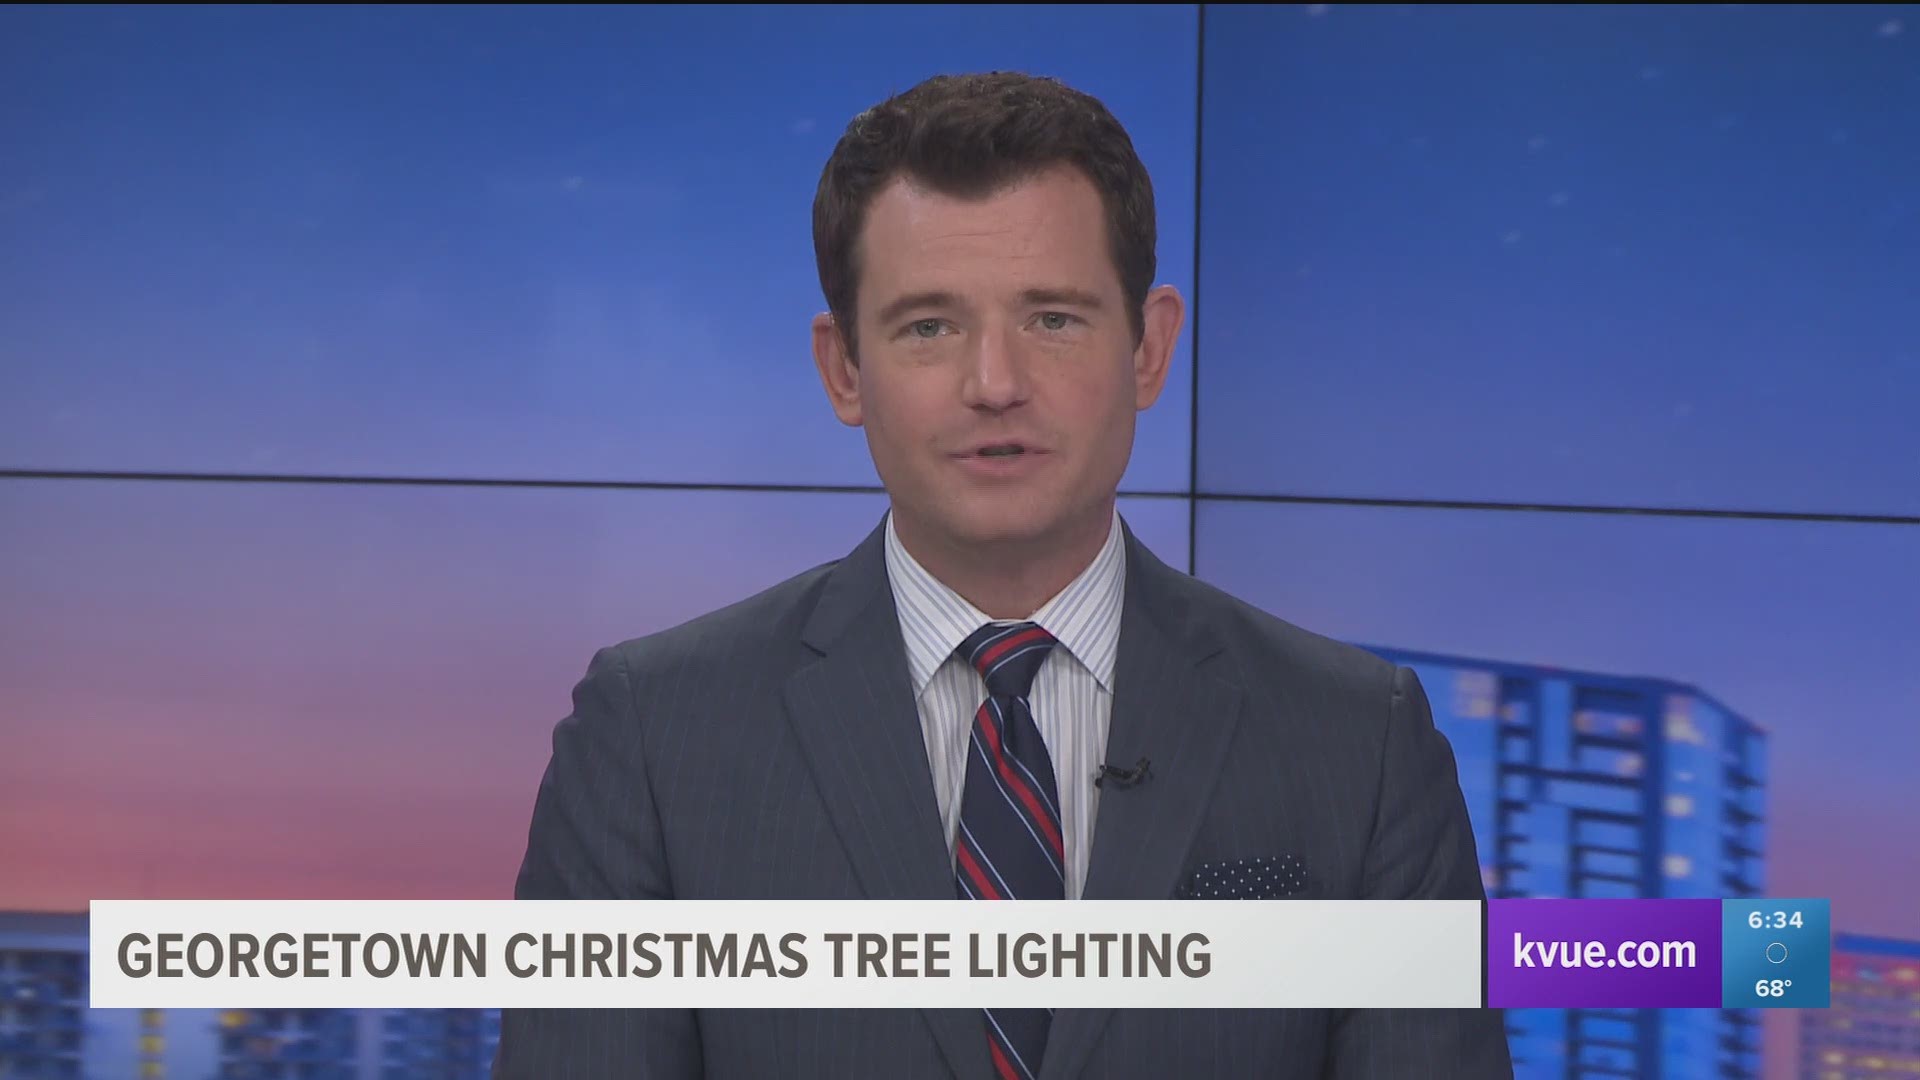 The square in Georgetown is expected to get a little brighter on Friday night for a great celebration the public can attend after Black Friday shopping.
STORY: http://www.kvue.com/news/local/georgetown-lighting-ceremony-to-take-place-friday-night/6170658